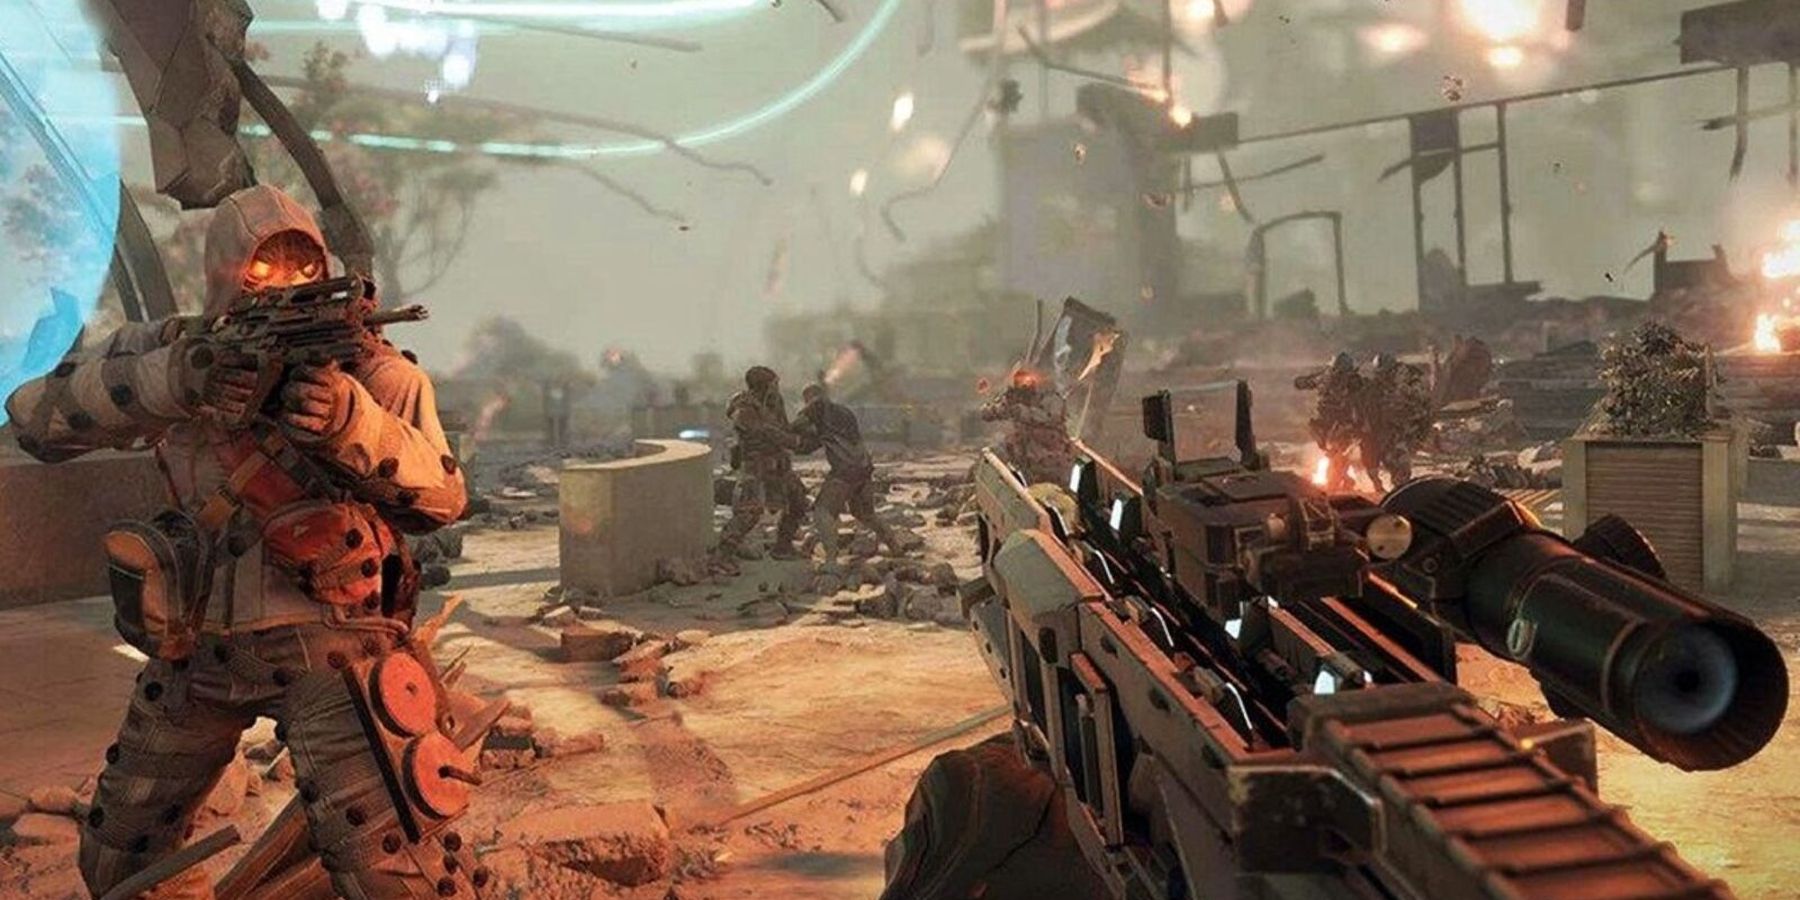 Where To Play The Killzone Games  Physical, Digital, Streaming